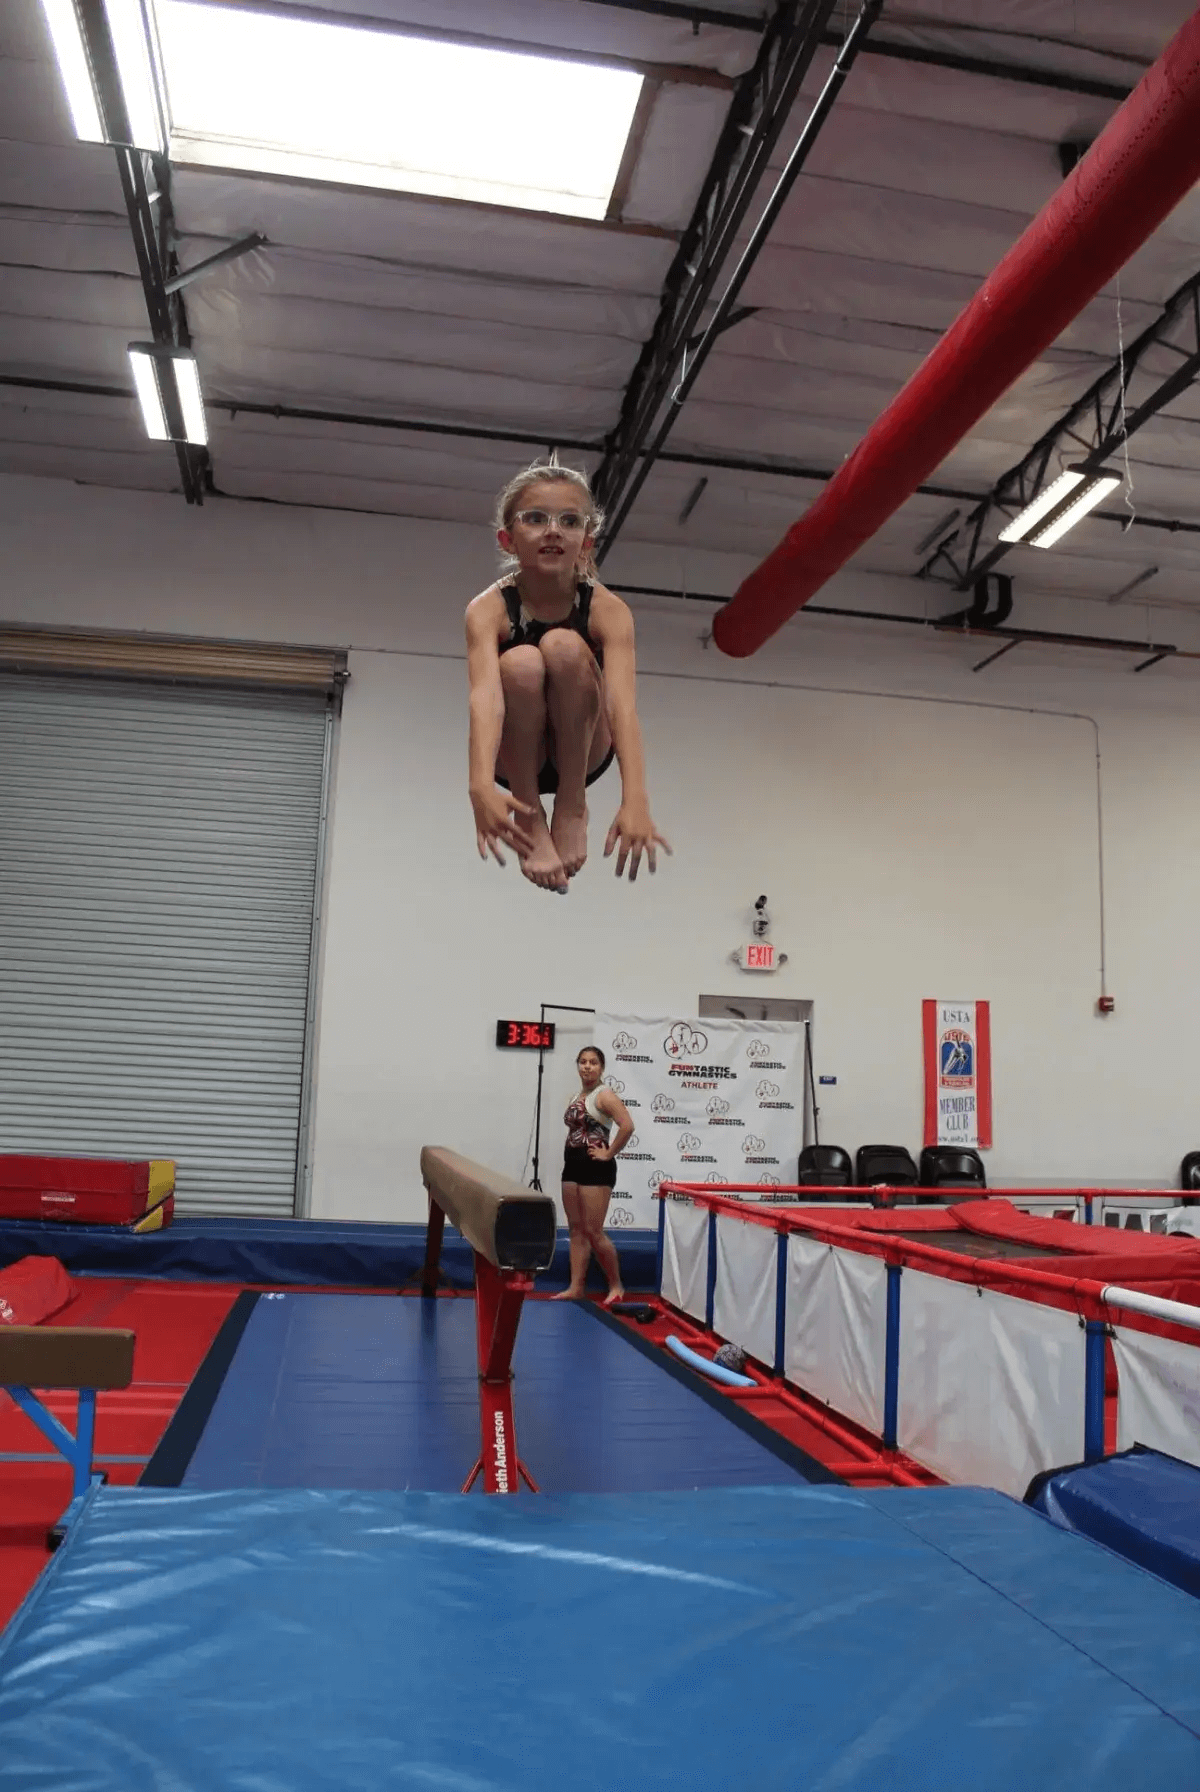 A girl jumping on a balance beam in an indoor gym.